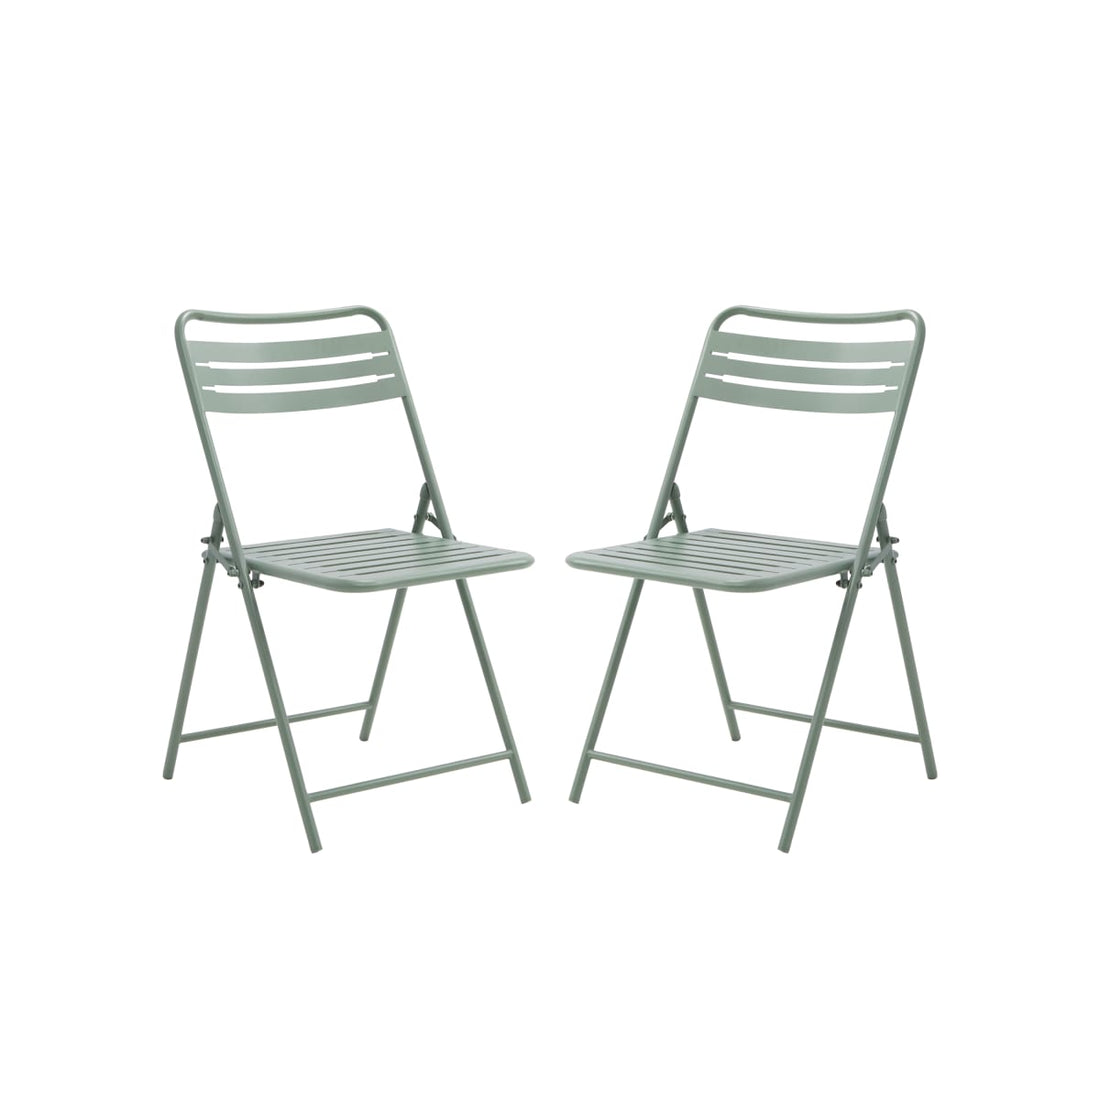 SET OF 2 CAFE II ORIGAMI FOLDING STEEL DINING CHAIRS GREEN